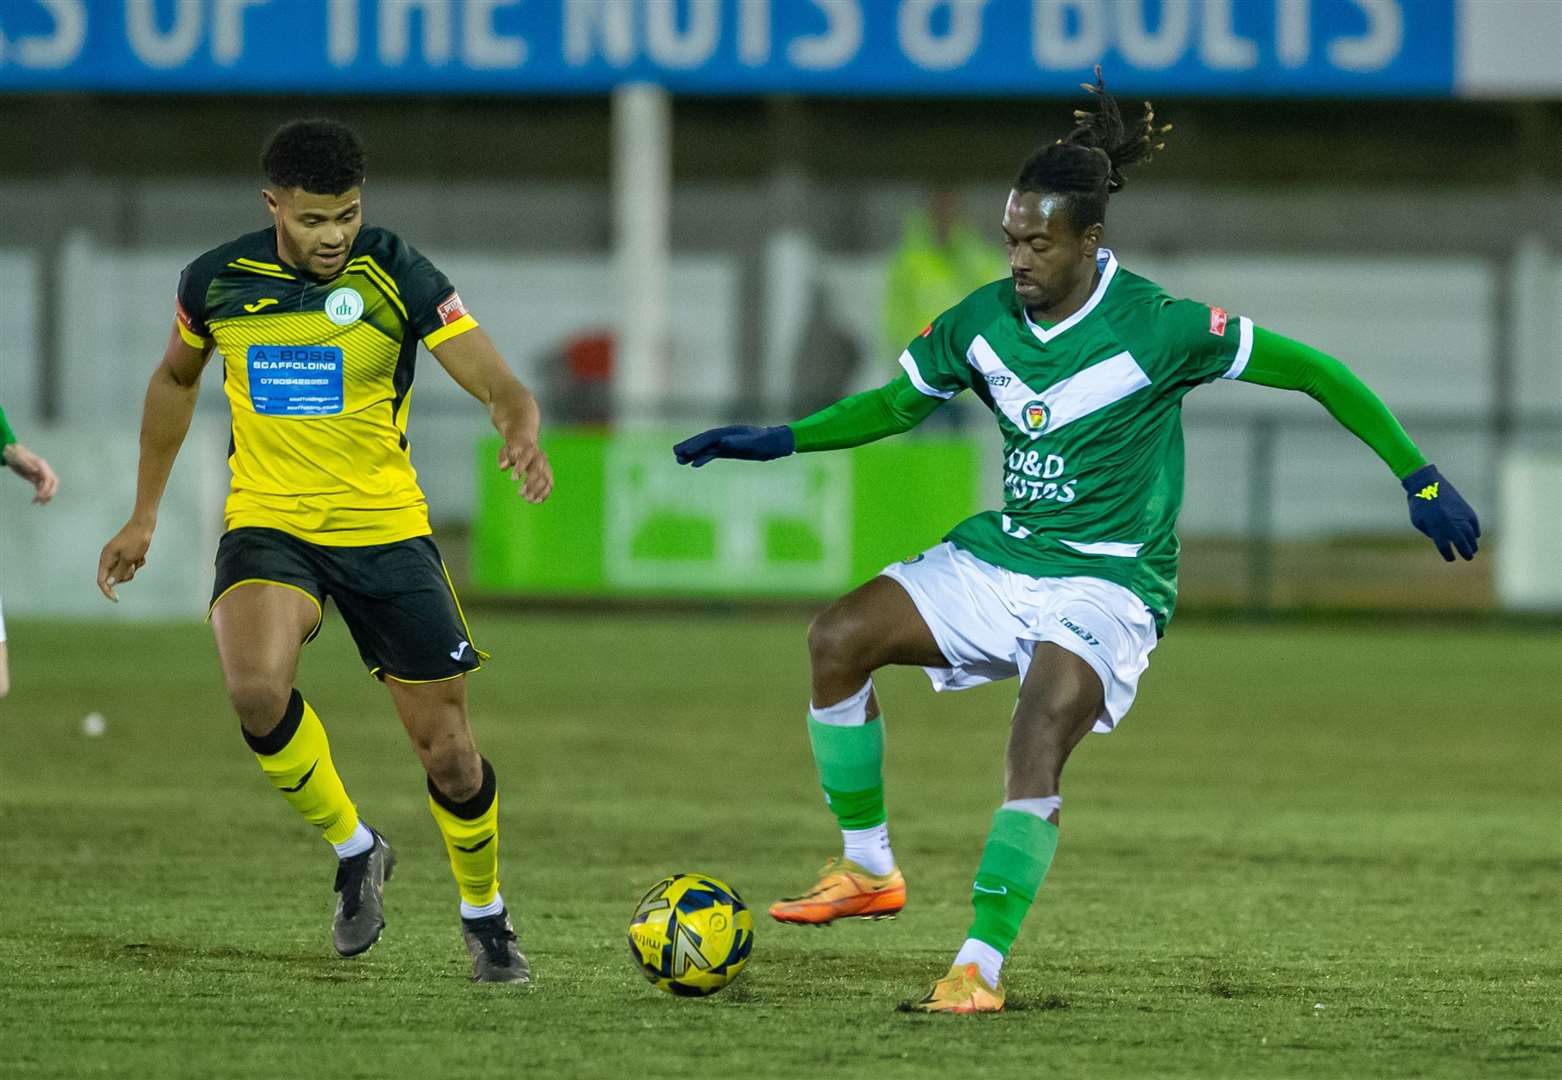 Ashford United midfielder Toby Ajala in action against Chichester. Picture: Ian Scammell